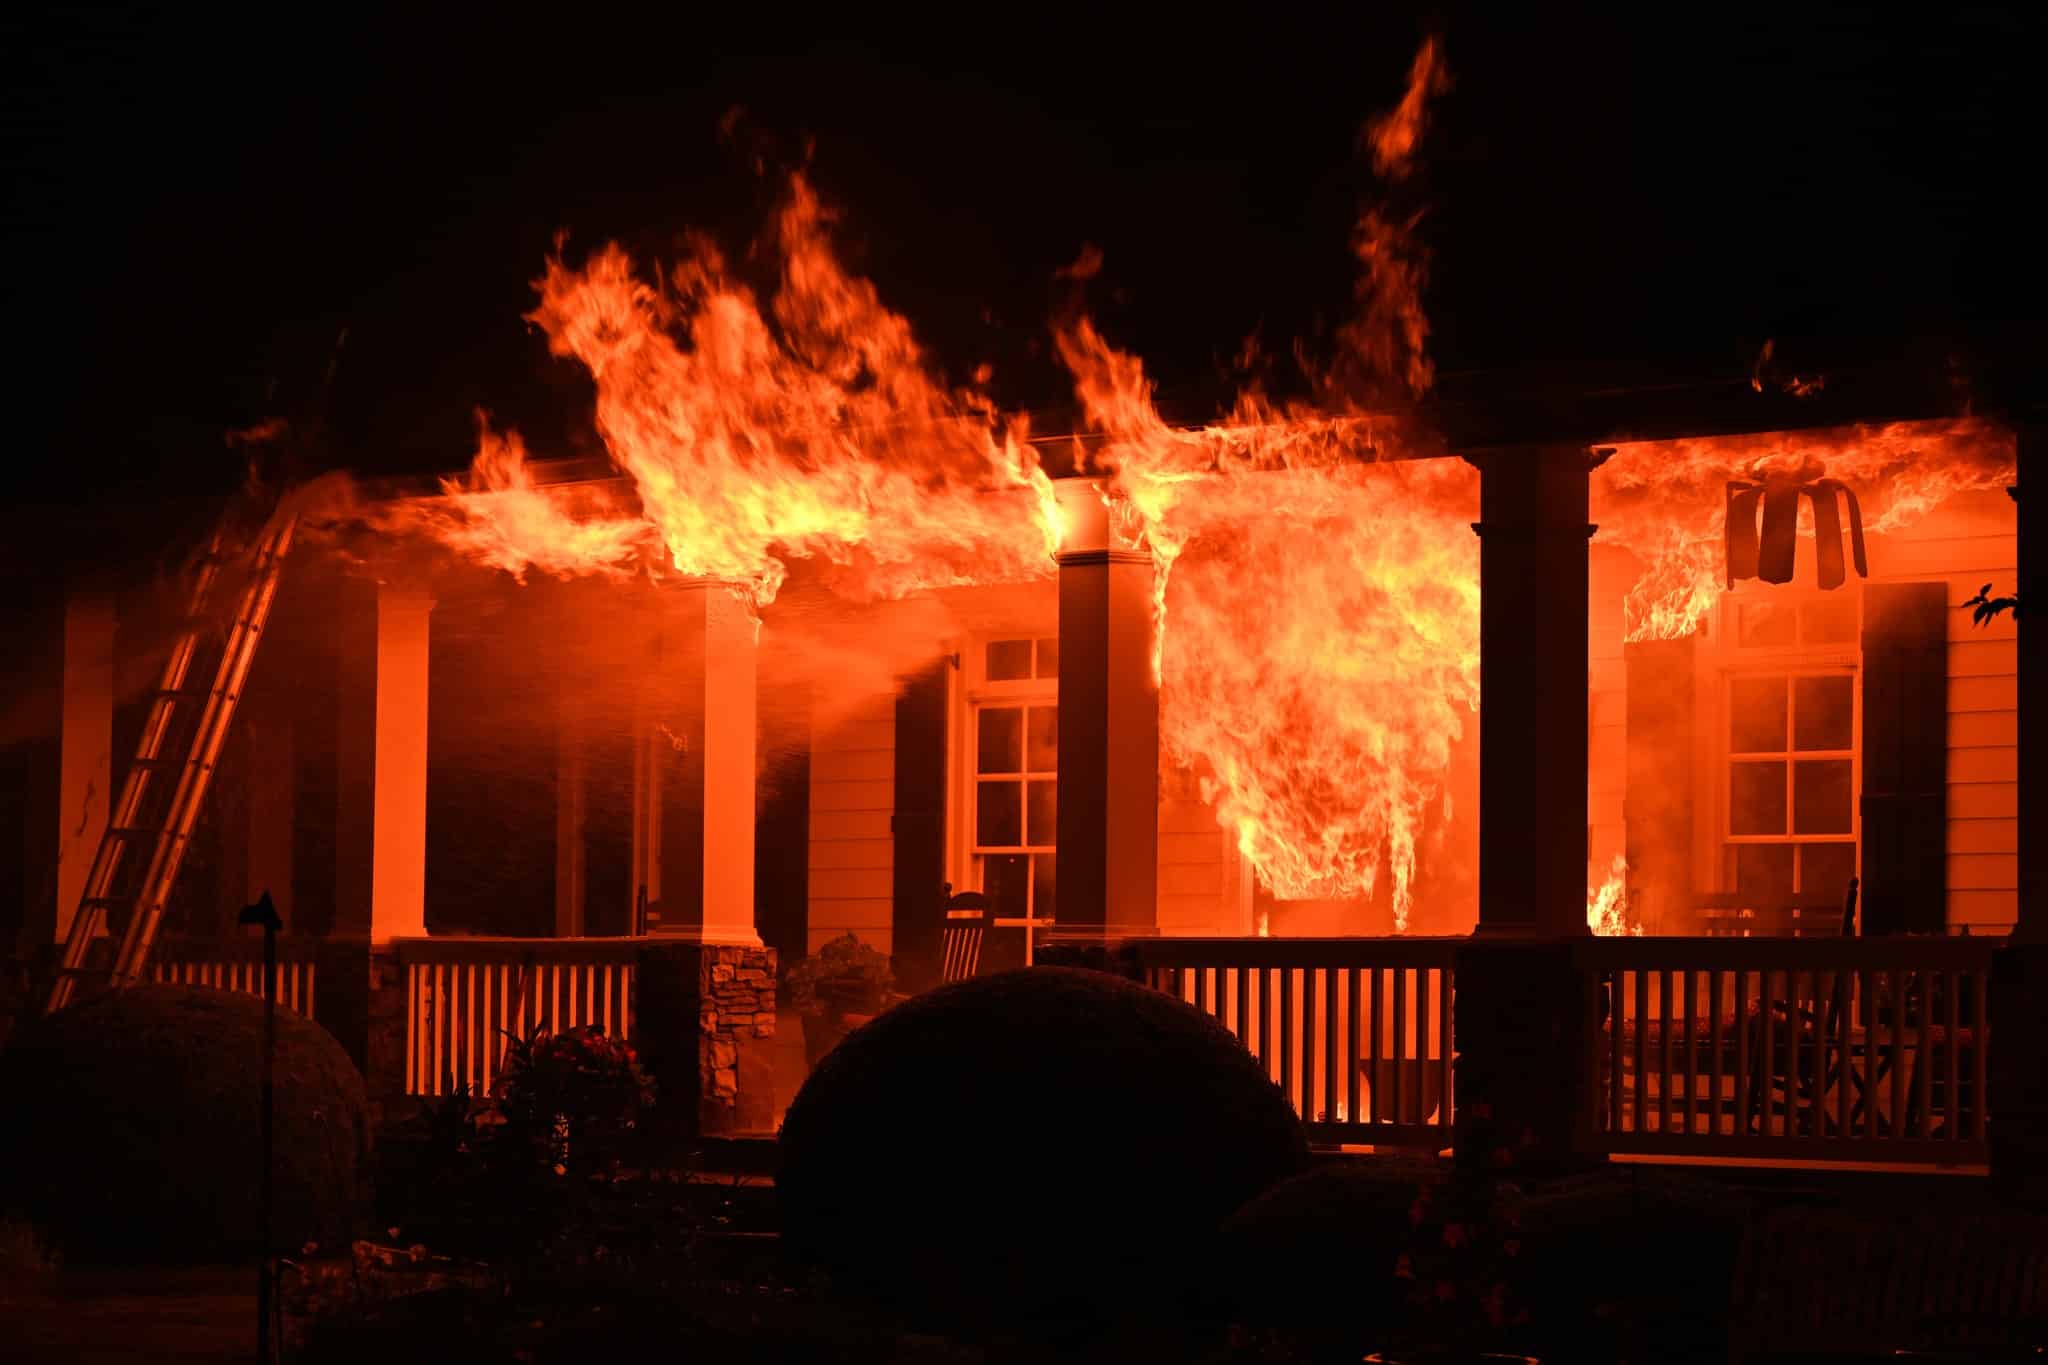 Photos: Major House Fire in Lakeside Ansley Subdivision in Roswell